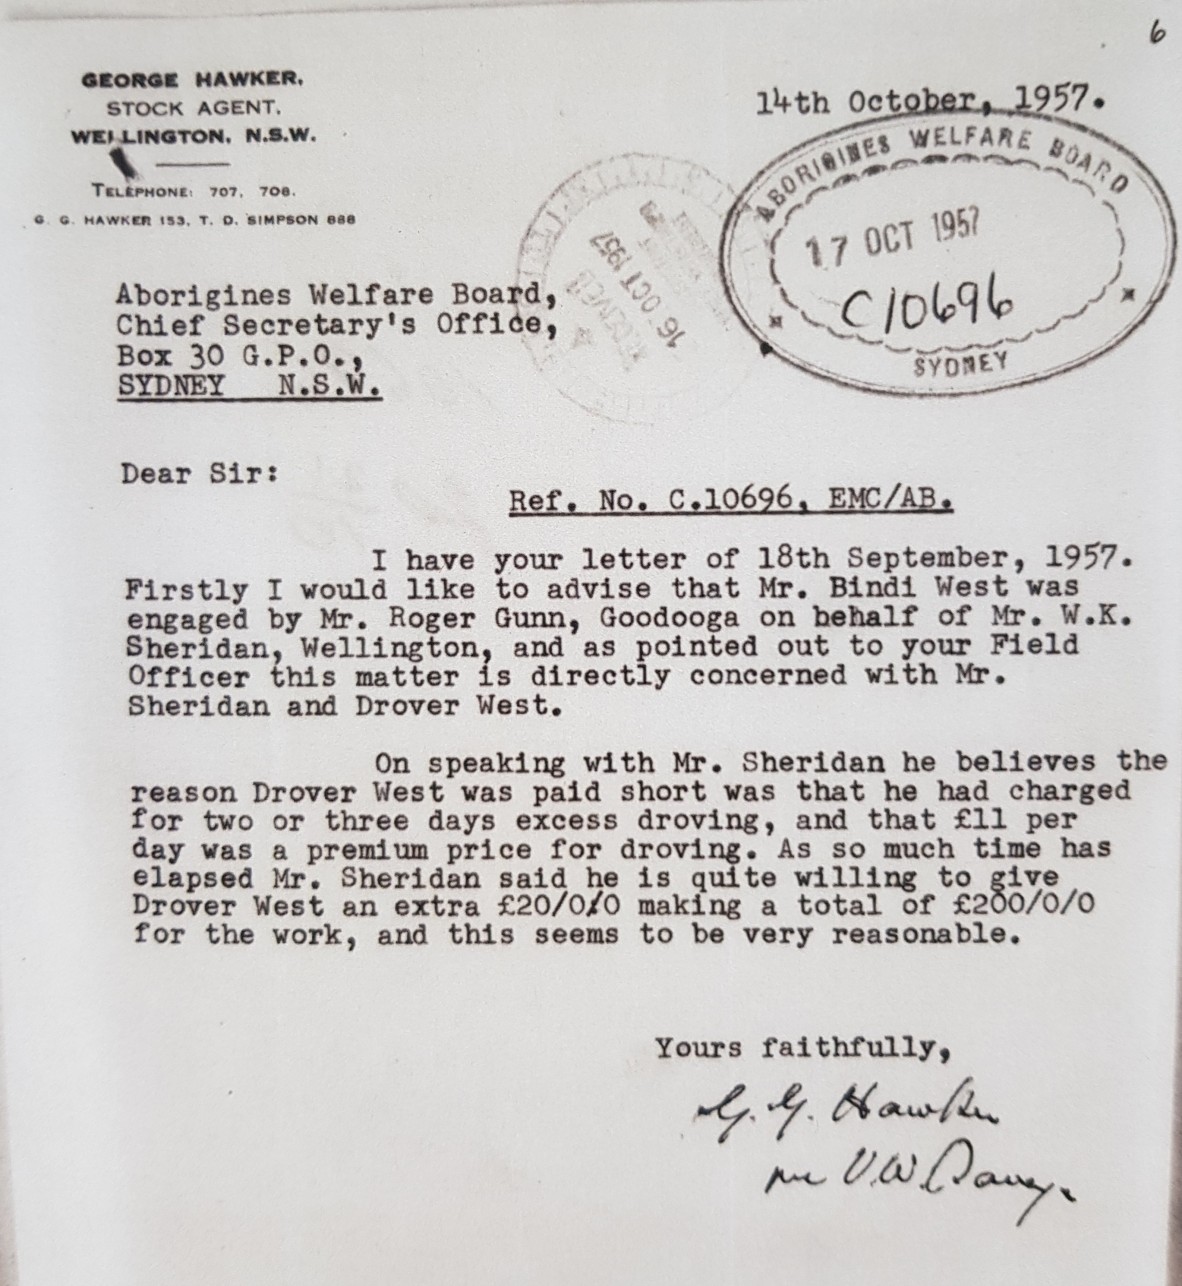 On the 14th October 1957, Hawker finally decides to write back to Saxby, over a month after Saxby’s letter is sent to him asking about his intentions to pay.   Hawker is indignant that ‘as pointed out to your field officer, this matter is directly concerned with Mr Sheridan and Drover West.’  However, Hawker informs that the owner of the sheep Sheridan has offered to call it even at an extra 20 pound payment to Bindi West, ‘and this seems to be very reasonable.’, ‘as so much time has elapsed’.   (…..Serious